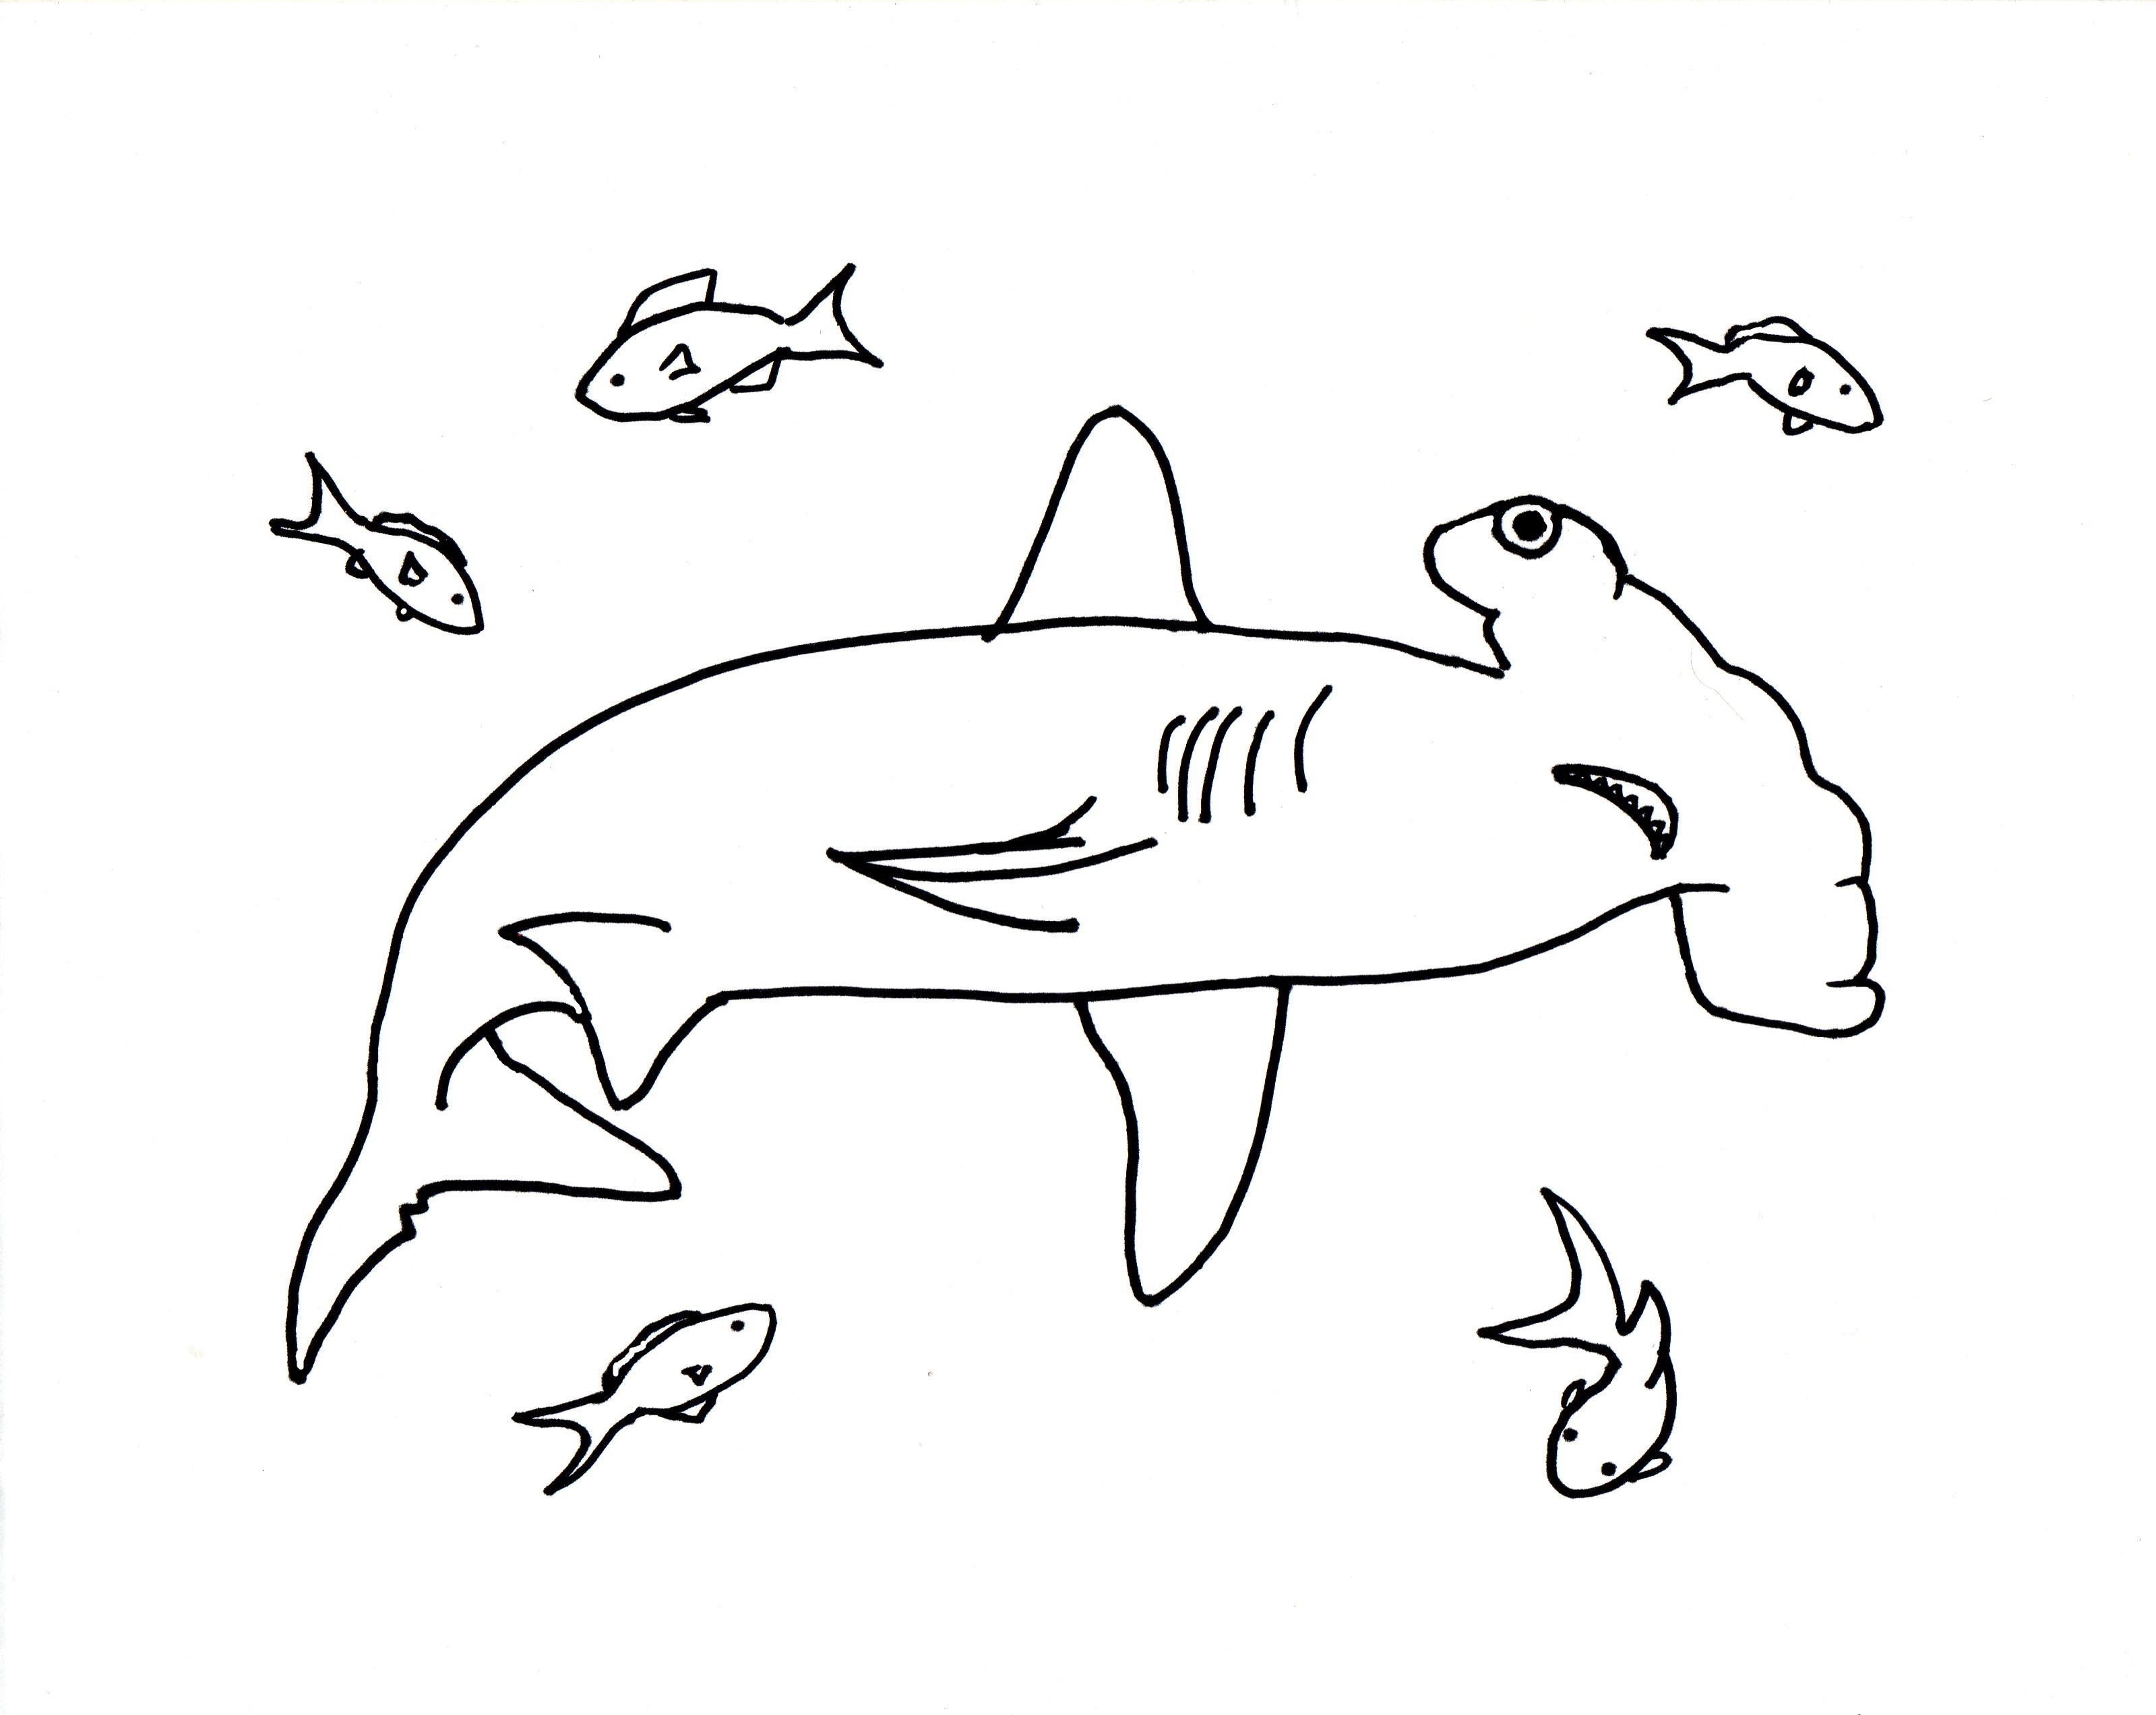 Hammerhead Shark Coloring Page - Art Starts for Kids